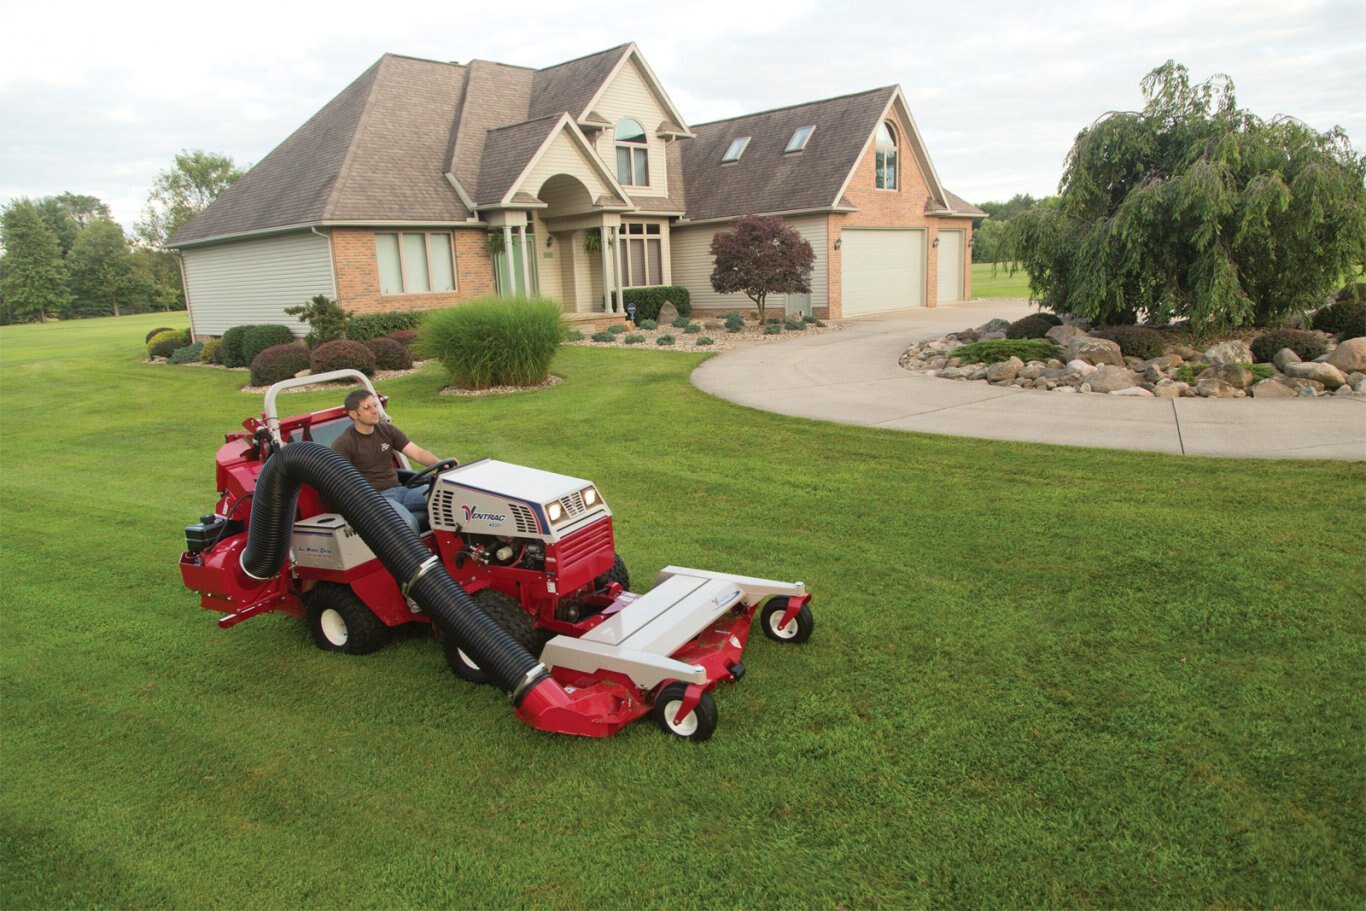 Ventrac RV602 Vacuum Collection System